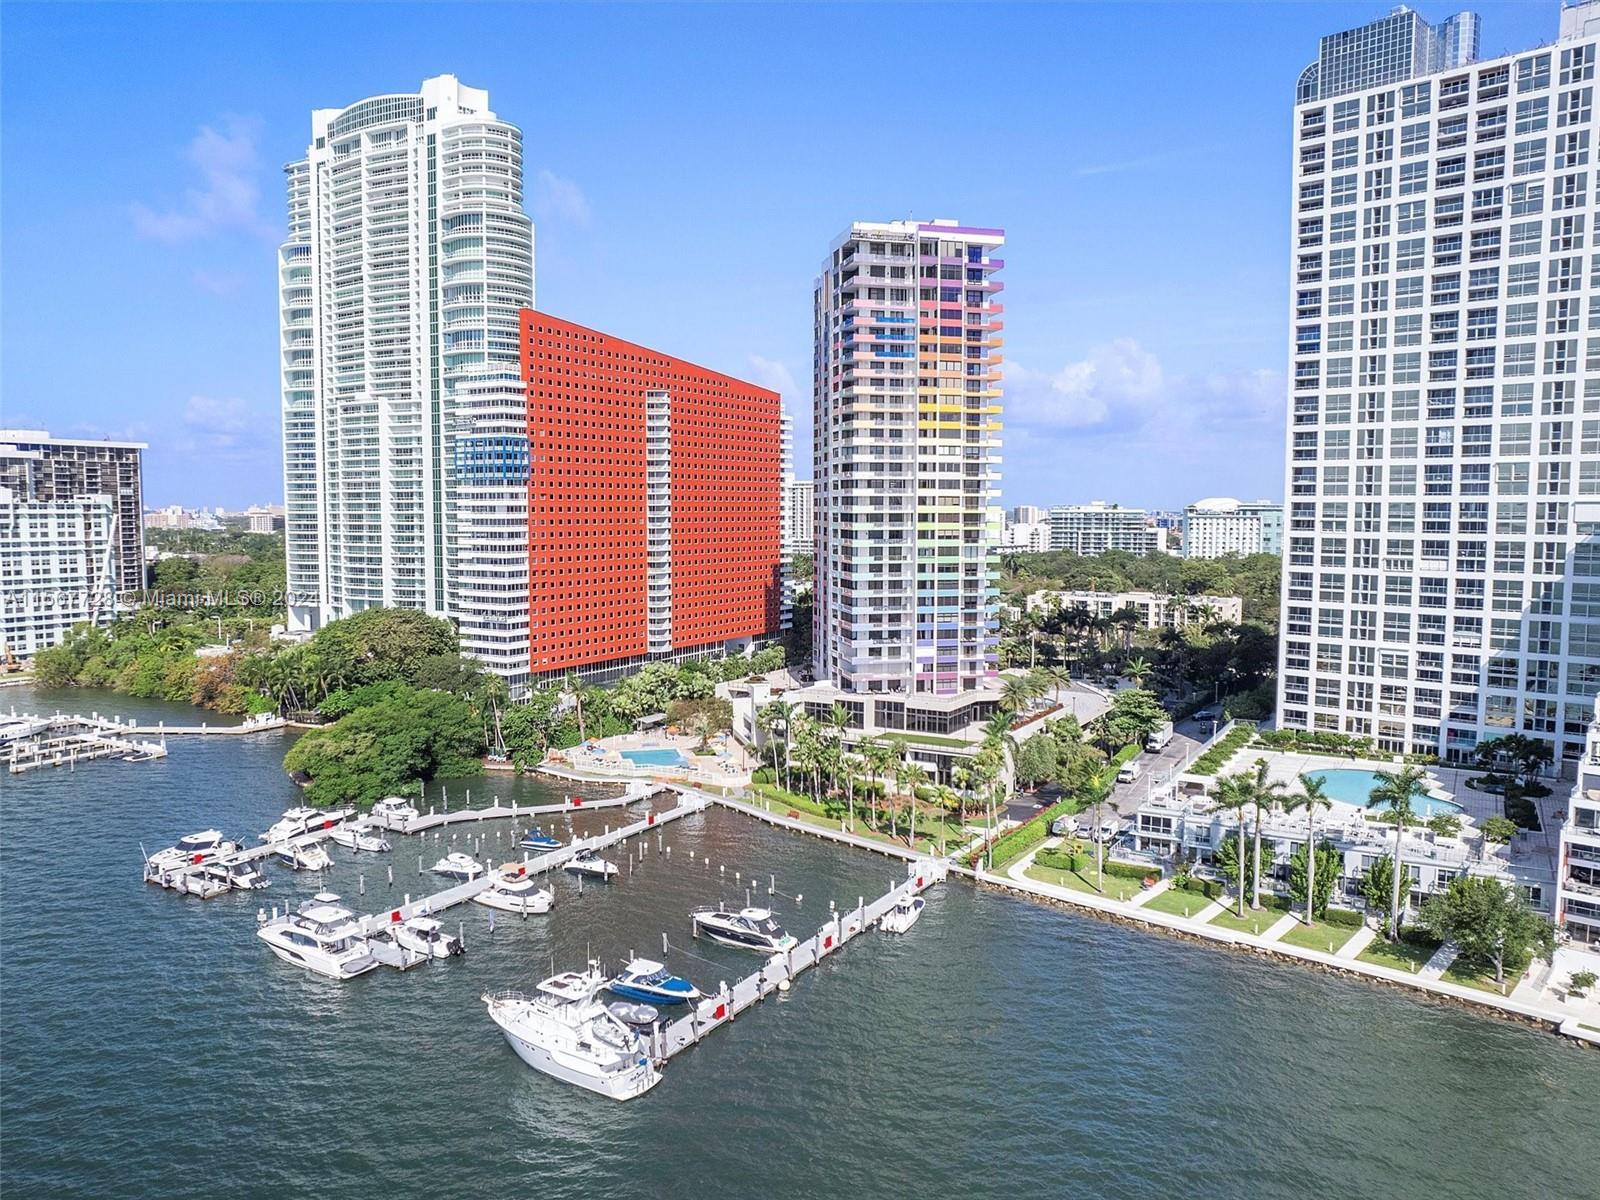 Behold breathtaking vistas of the shimmering waters and the dazzling skyline of Brickell city from t